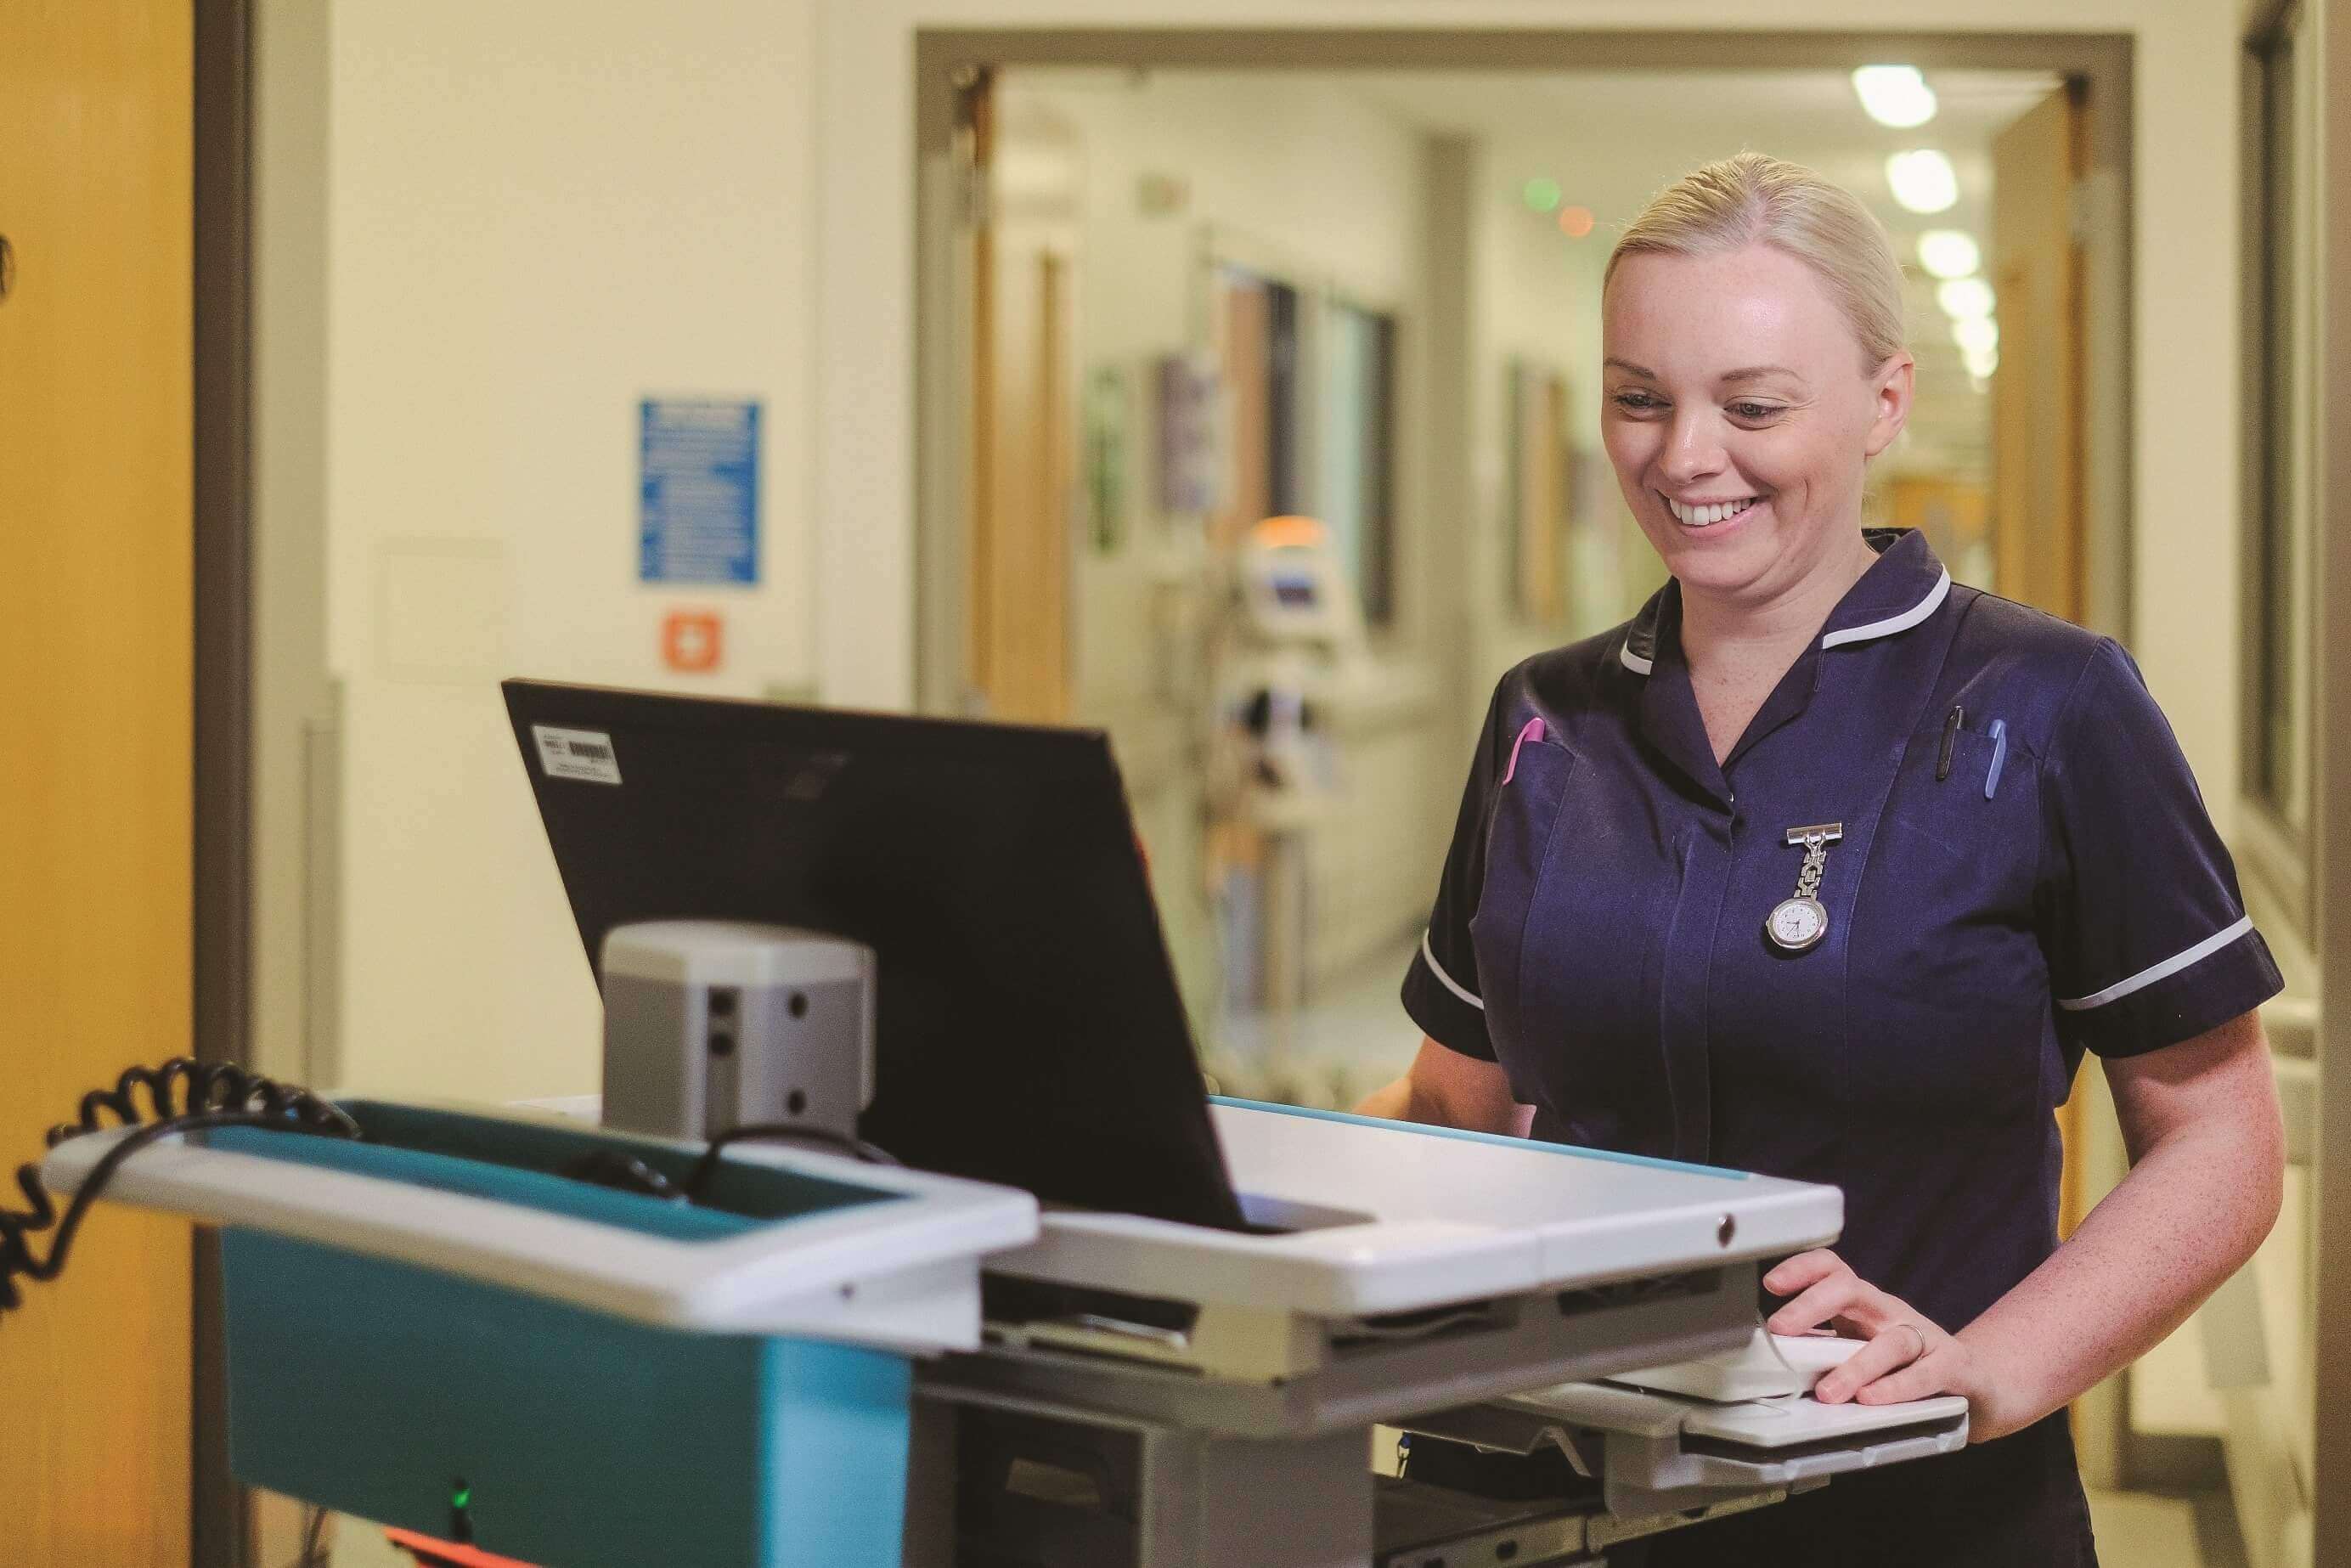 Newcastle Upon Tyne Hospitals Nhs Foundation Trust Implements E Rostering To Boost Patient Care 